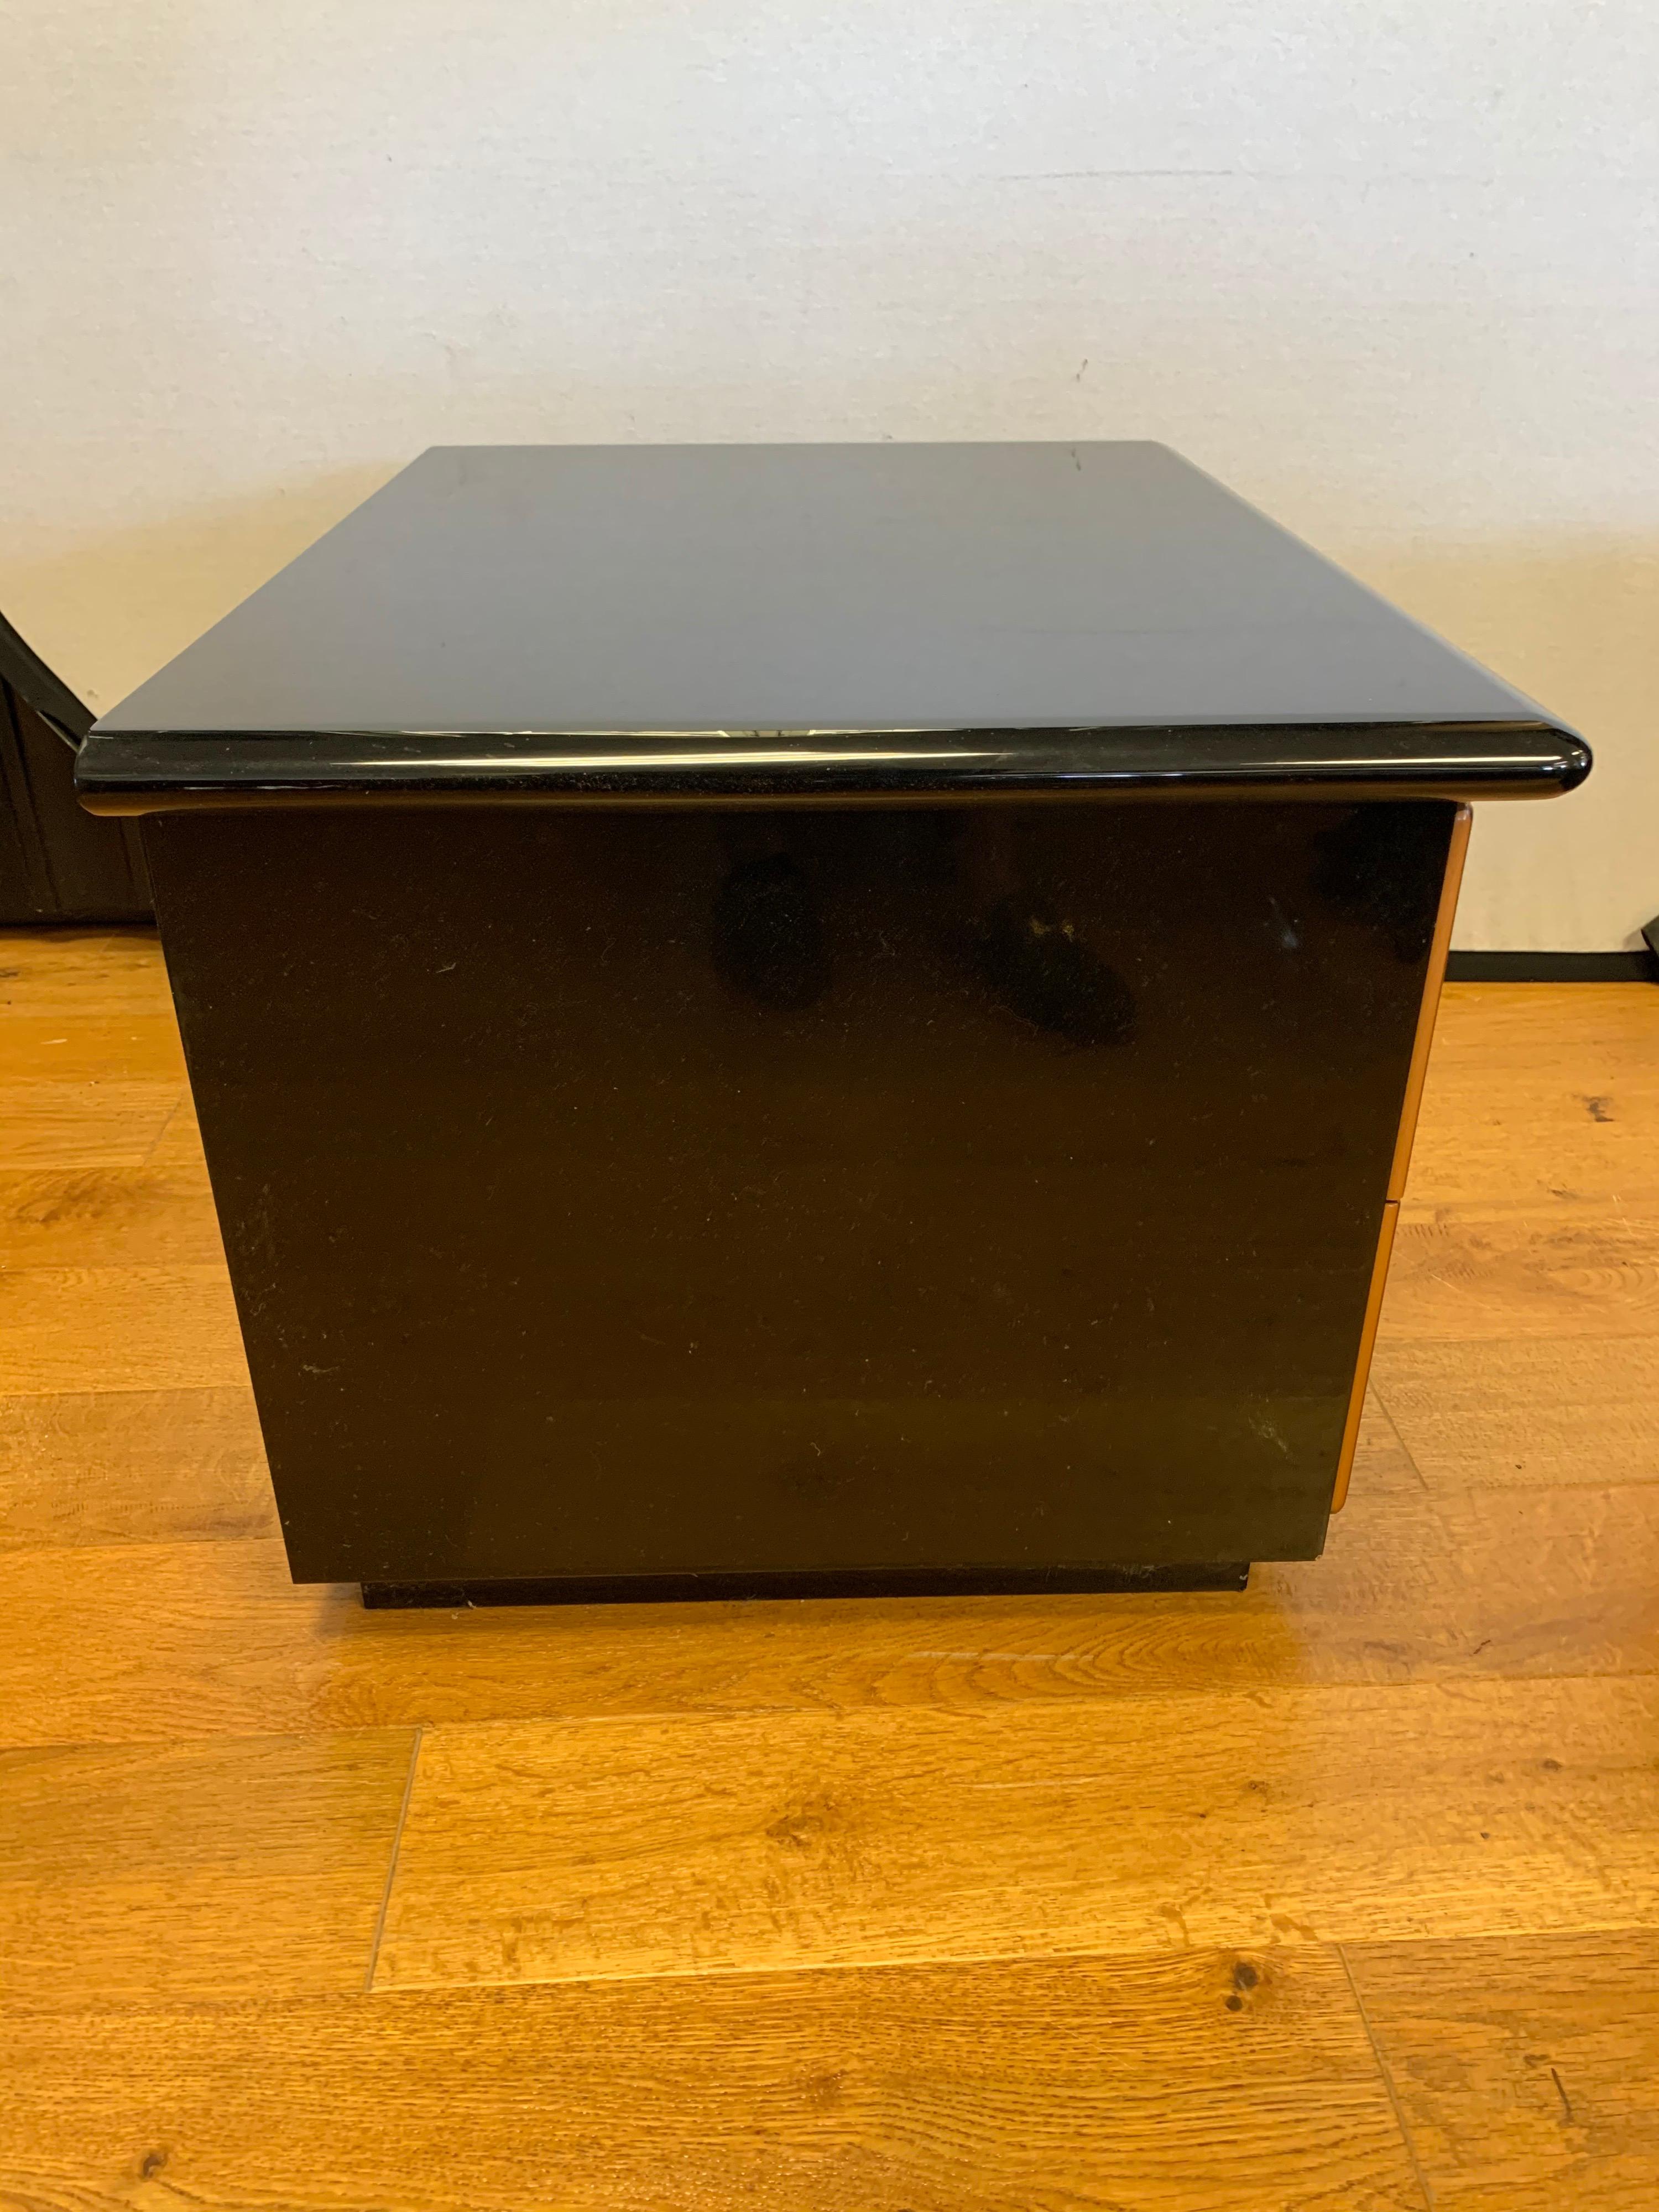 Roche Bobois Black Lacquer Nightstands, Pair Made in Italy Pierre Cardin 4